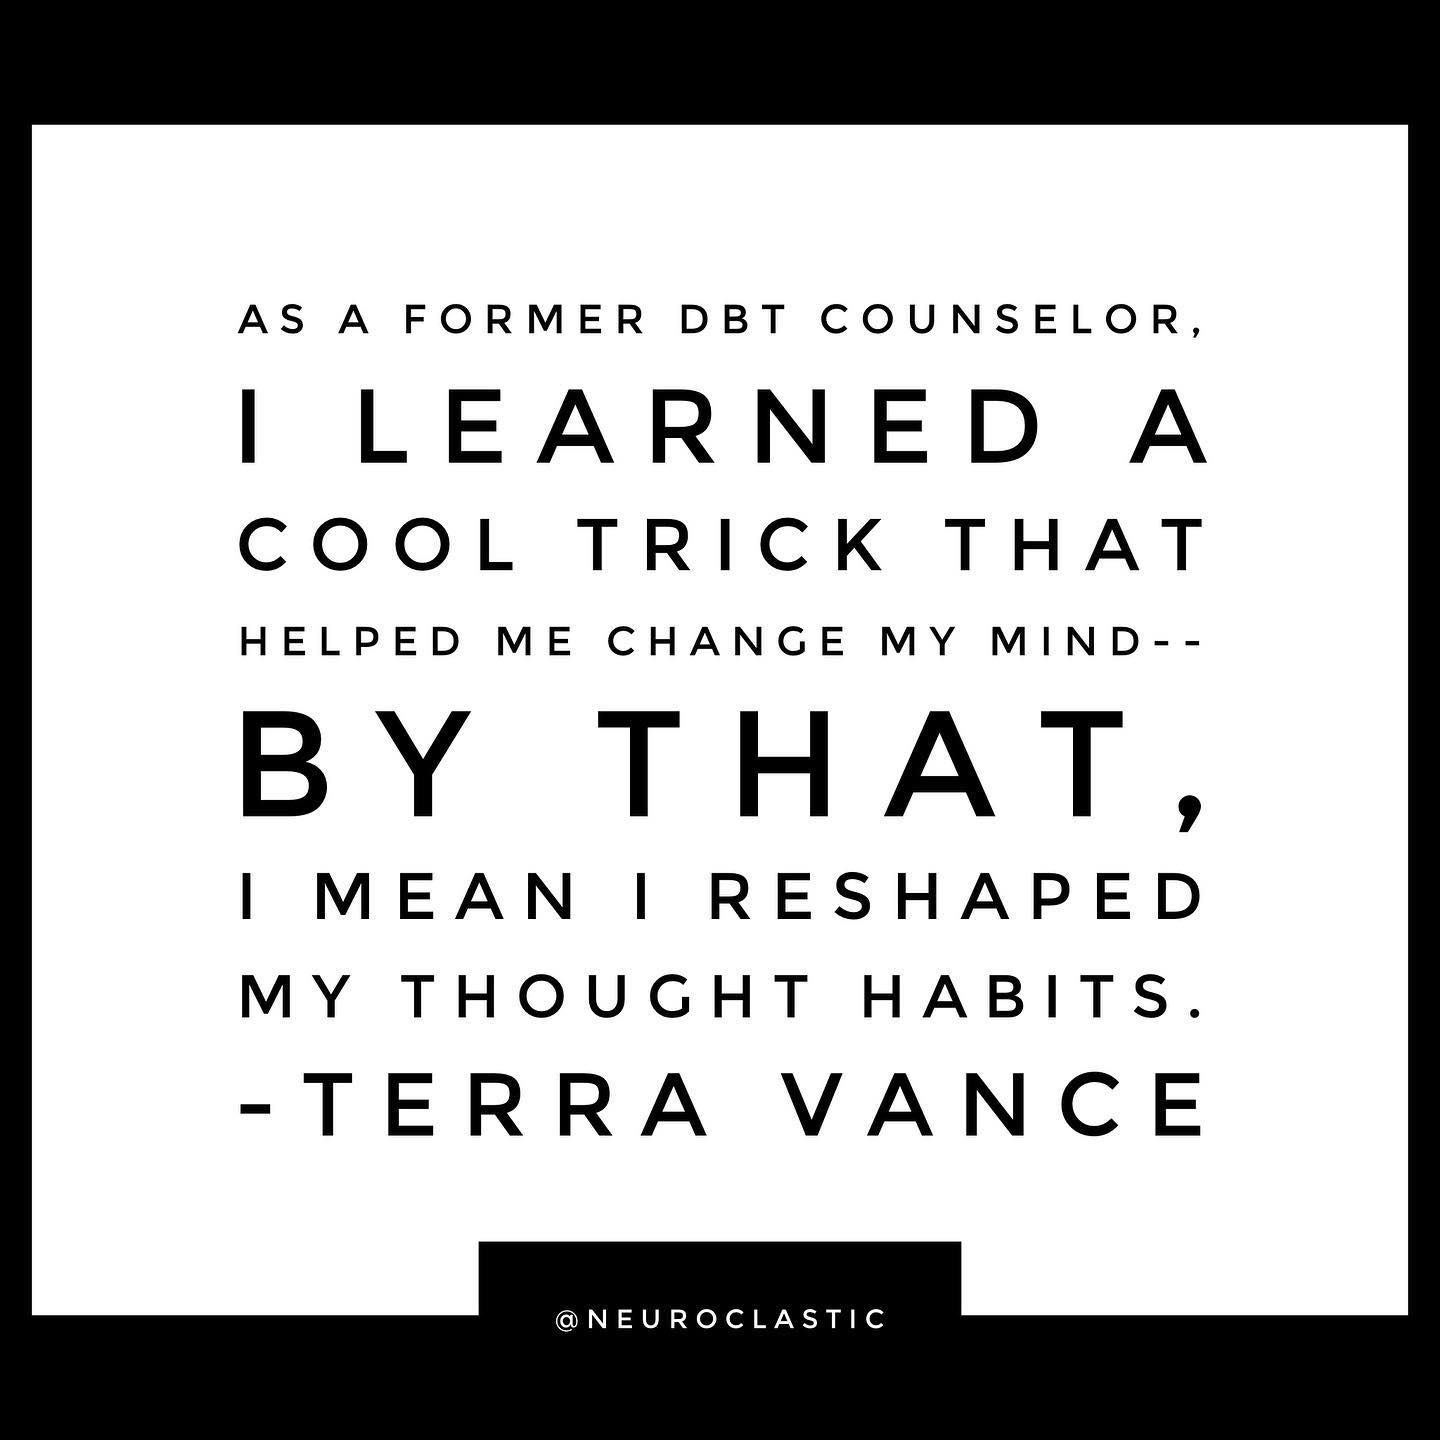 As a former DBT counselor, I learned a cool trick that helped me change my mind-- by that, I mean I reshaped my thought habits (Terra Vance) @NeuroClastic